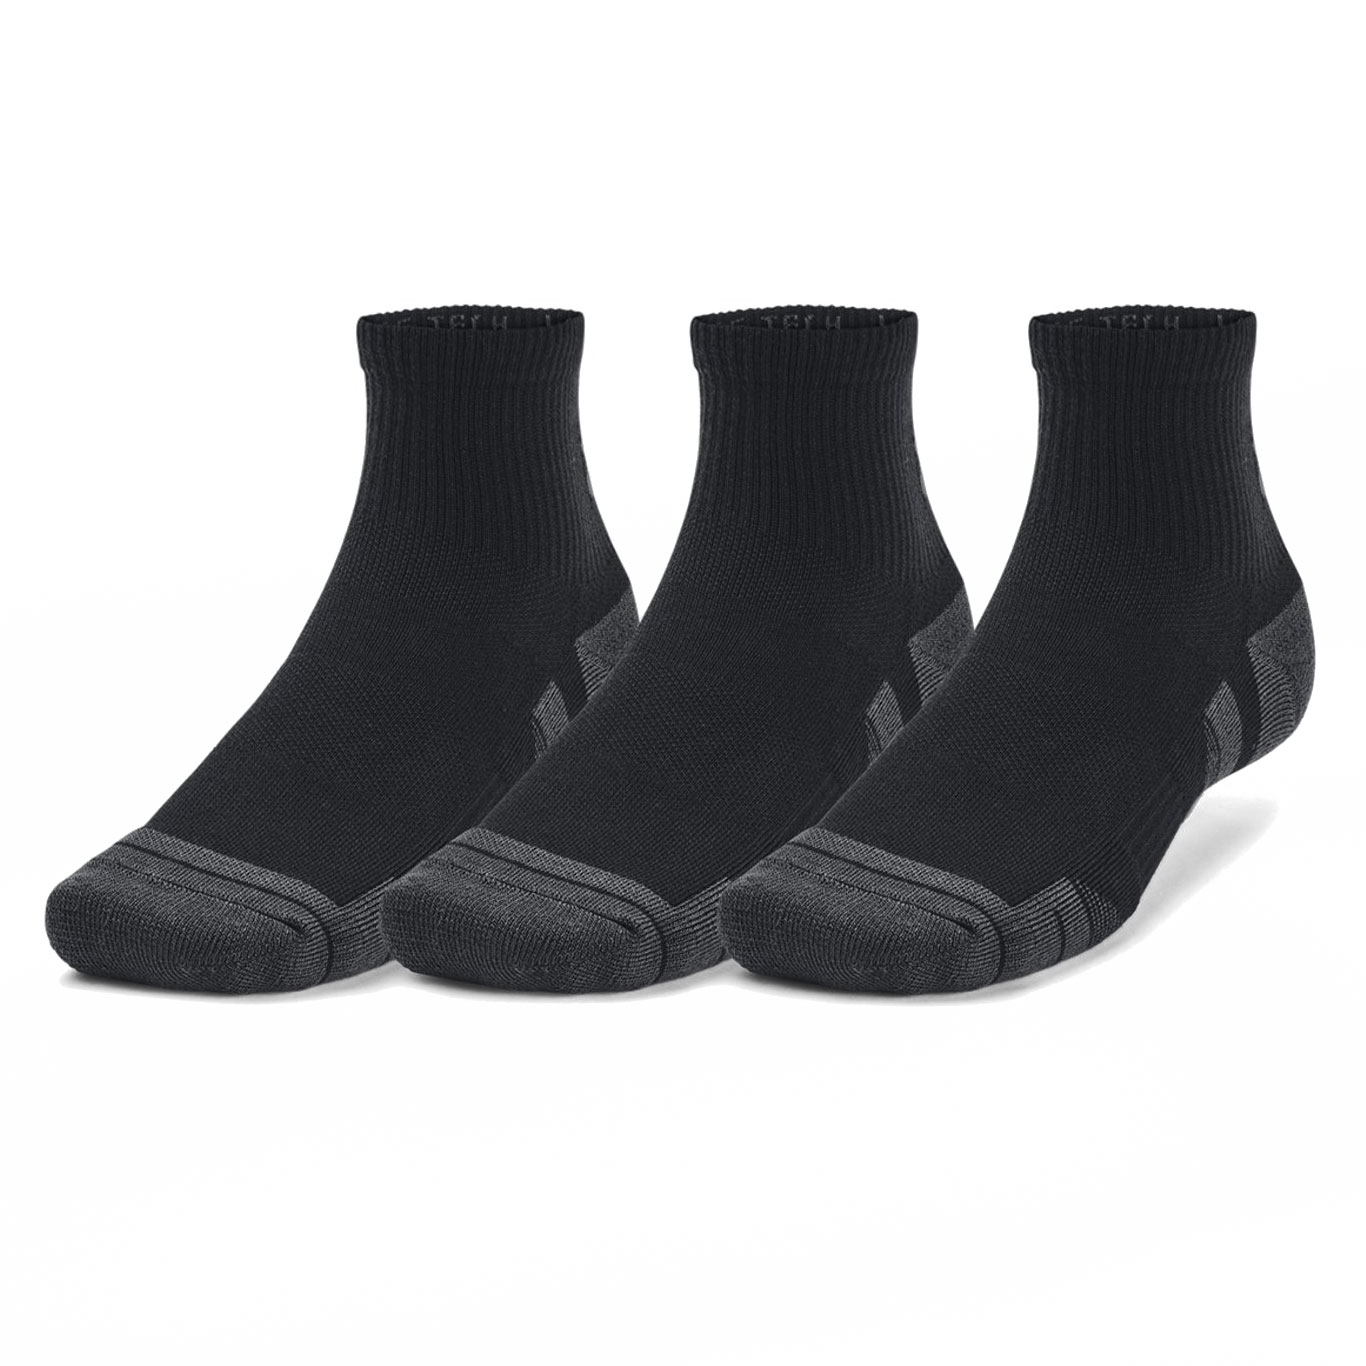 Picture of Under Armour UA Performance Cotton 3-Pack Quarter Socks - Black/Black/Pitch Gray